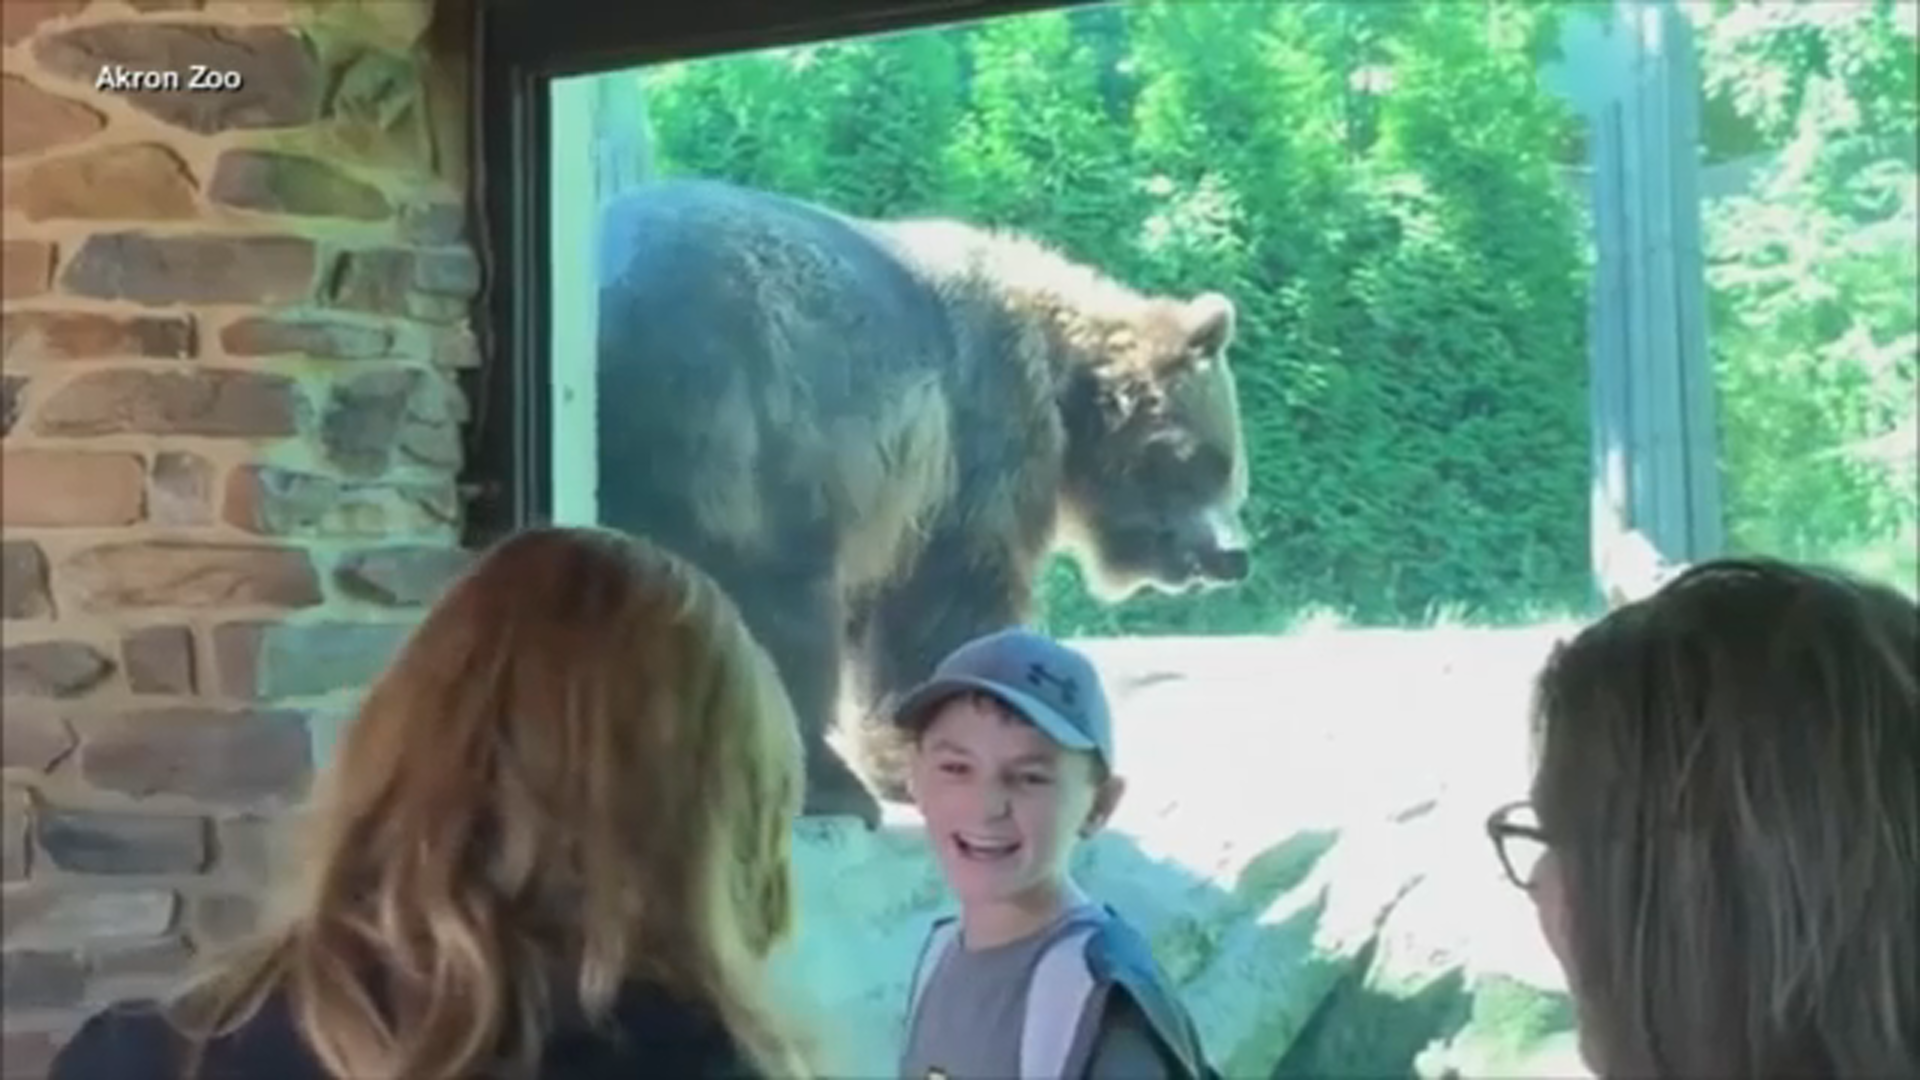 Ohio Zoo Visitors Delighted By Bear Dancing Against Wall To